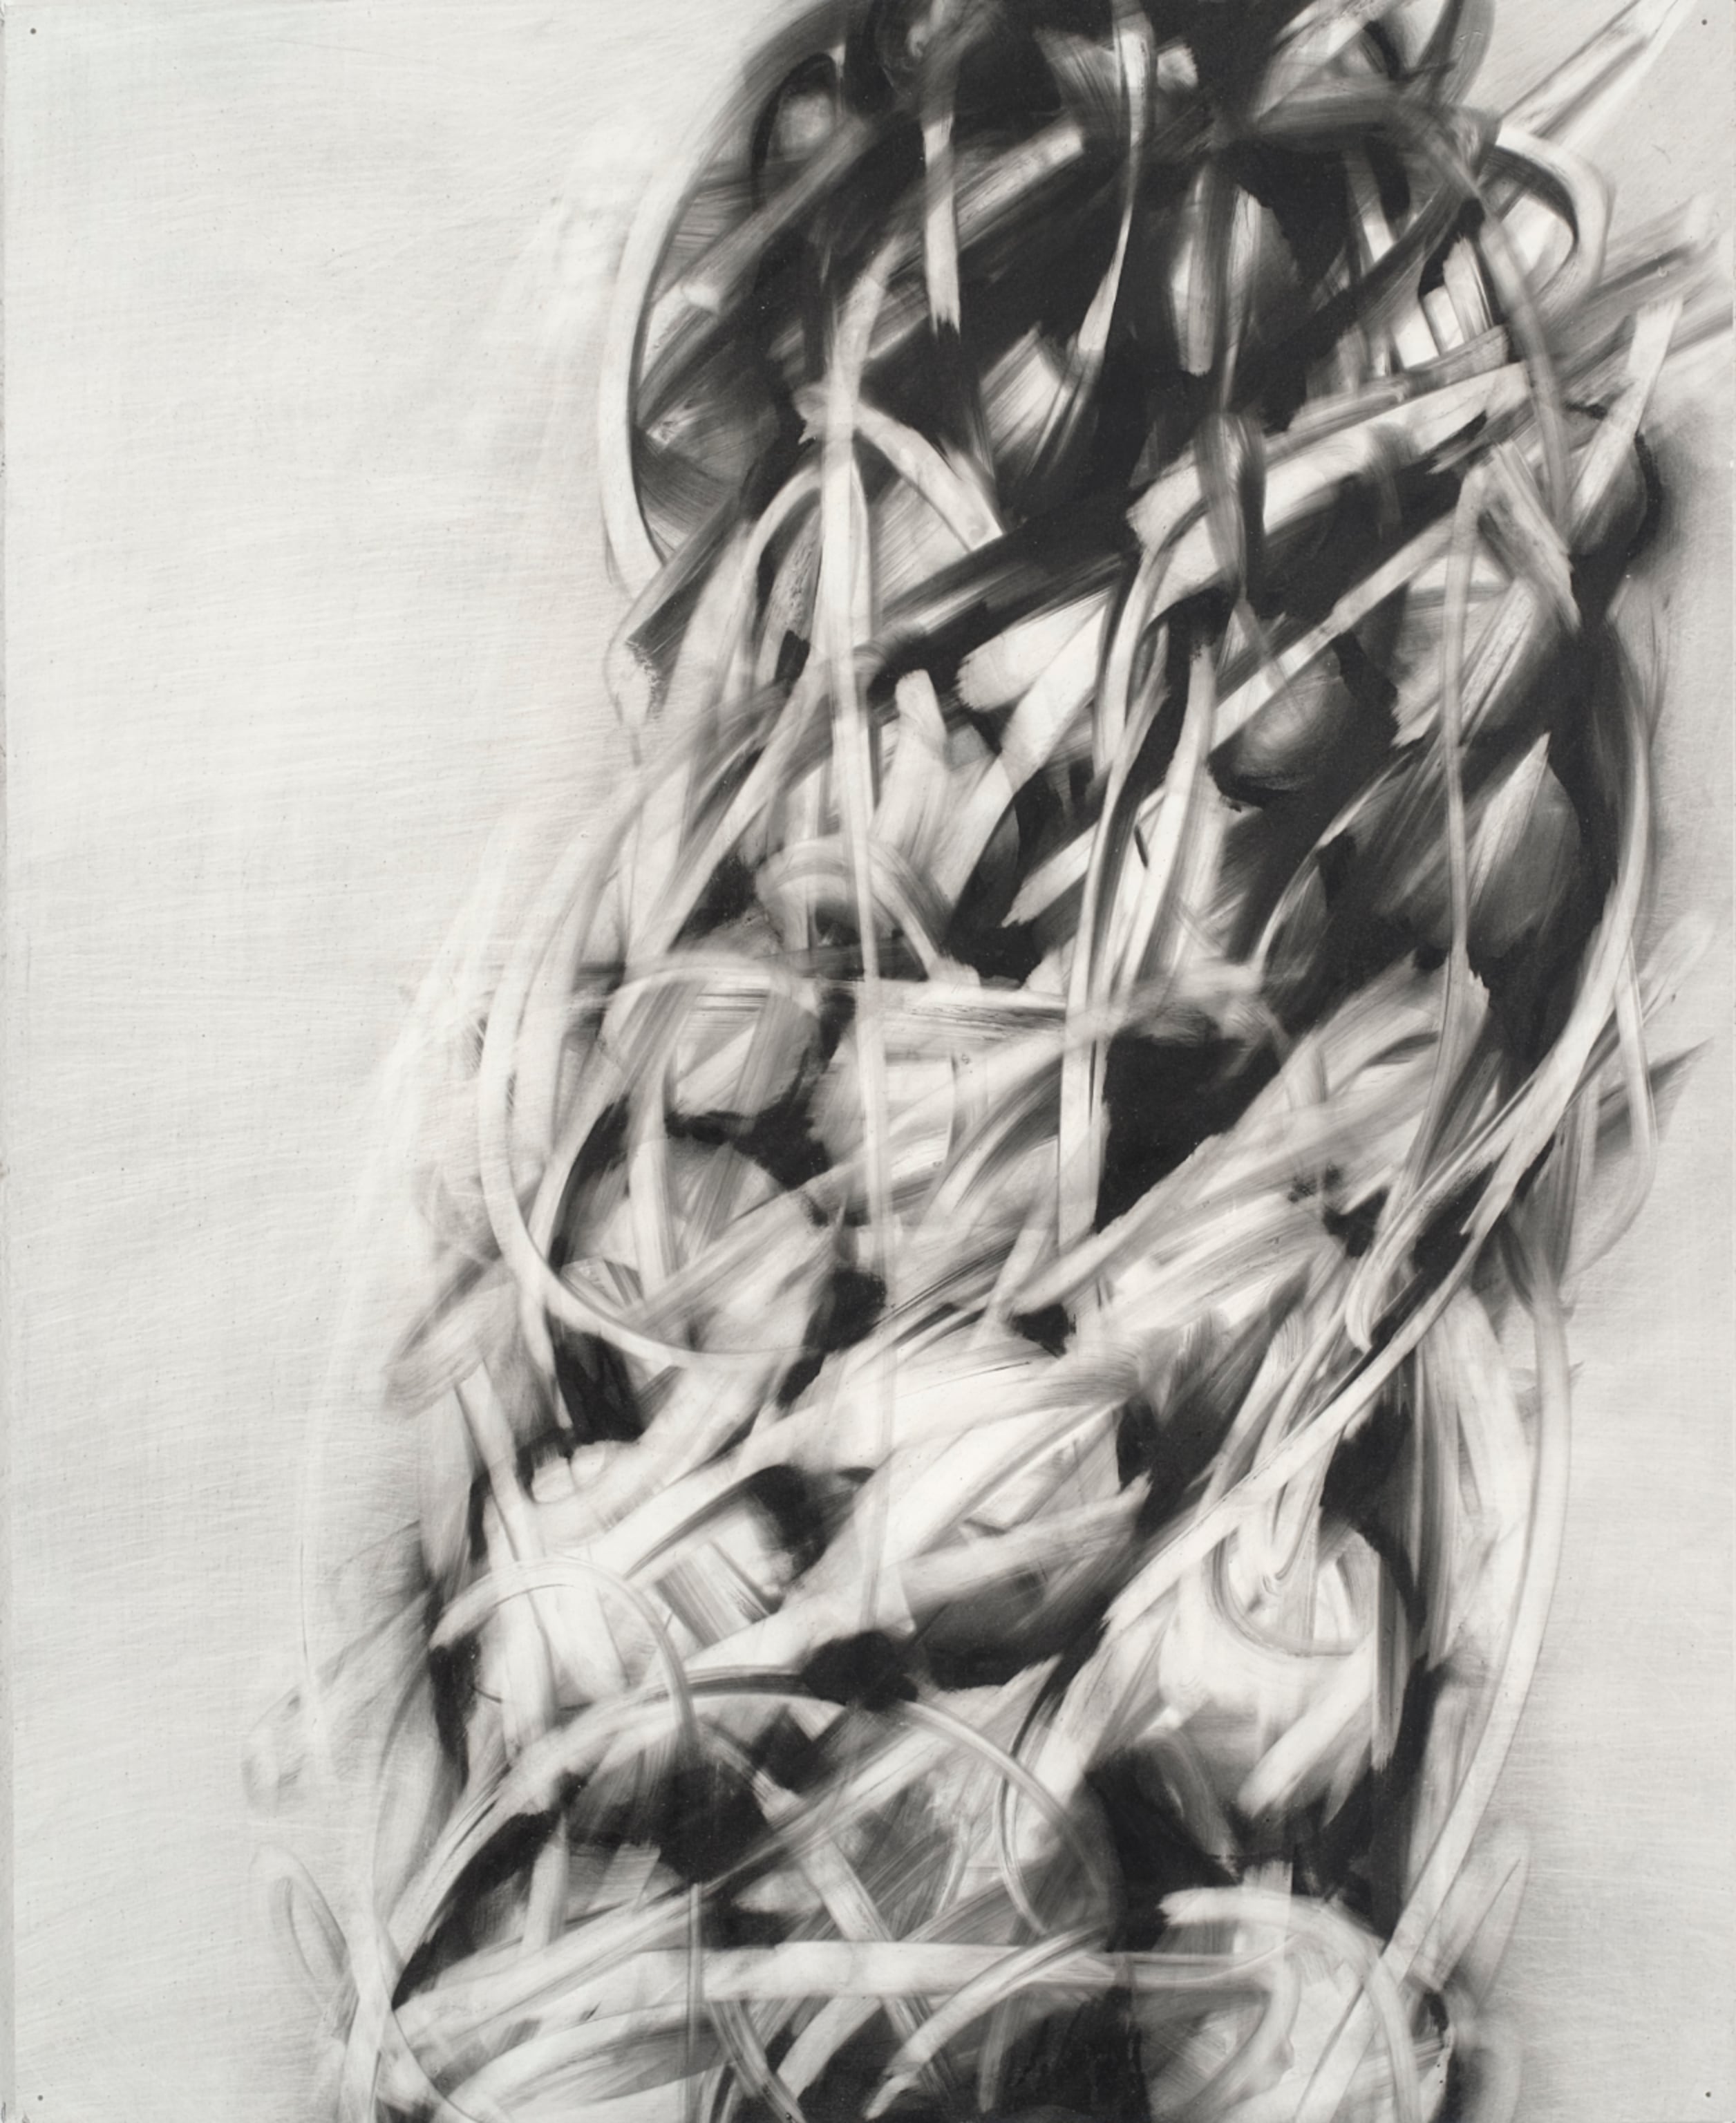 Bridge, 16 x 13 inches, oil, alkyd and graphite on paper, 2015